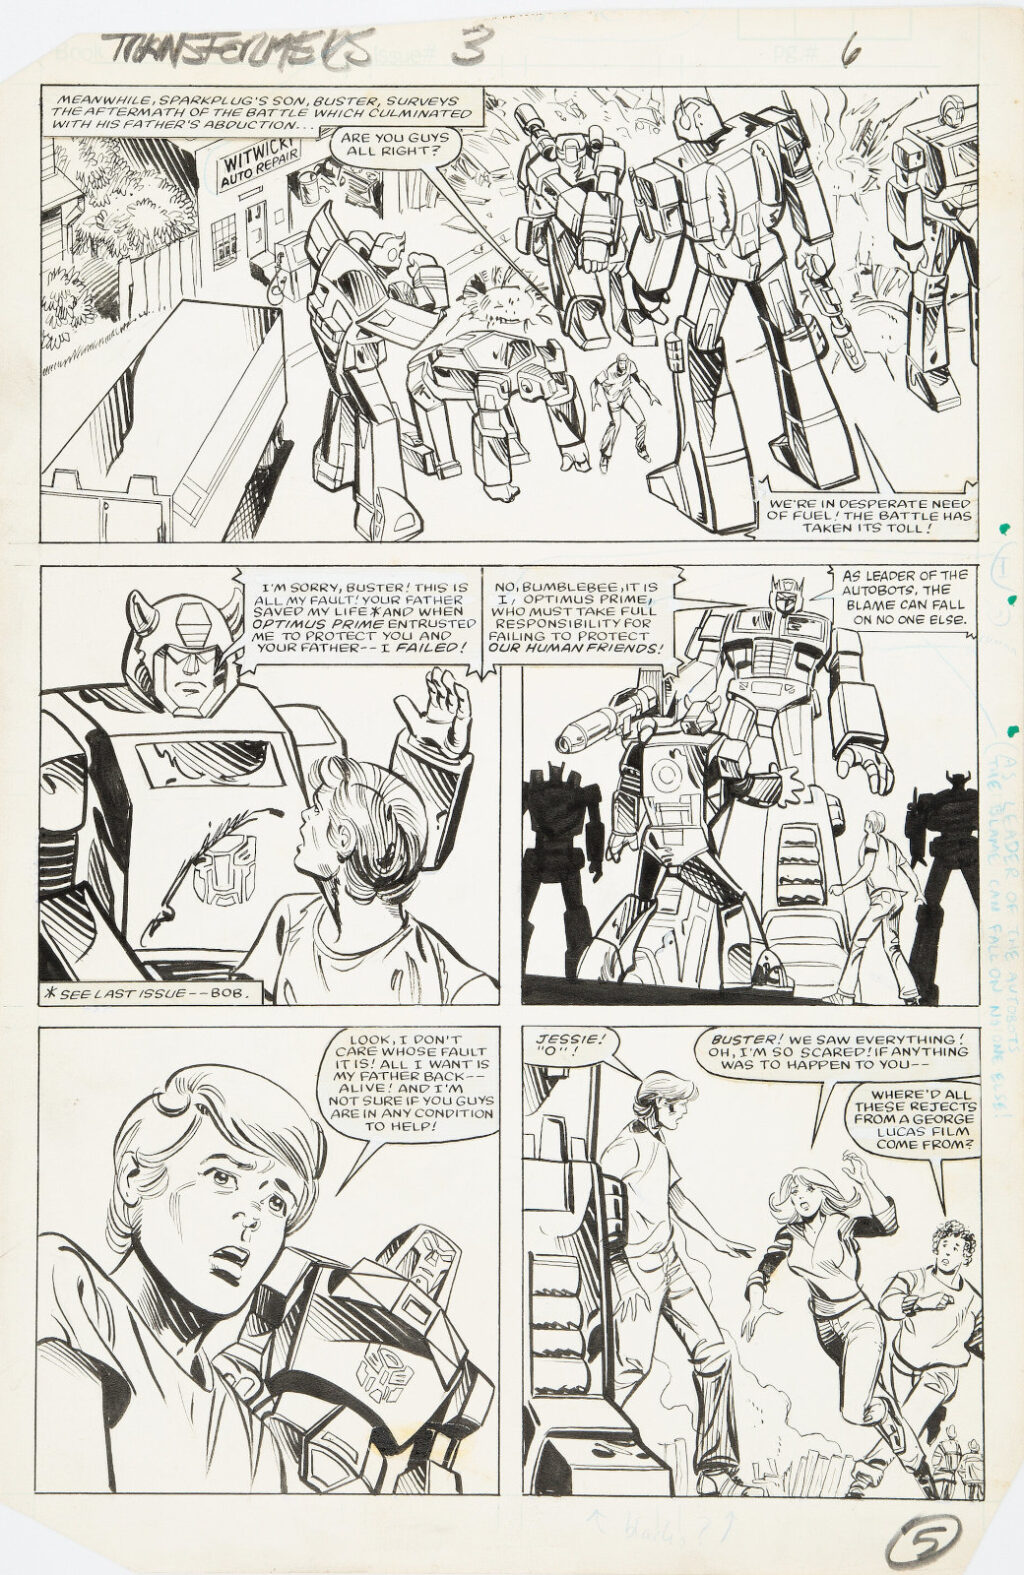 Transformers issue 3 page 5 by Frank Springer Kim DeMulder and Mike Esposito